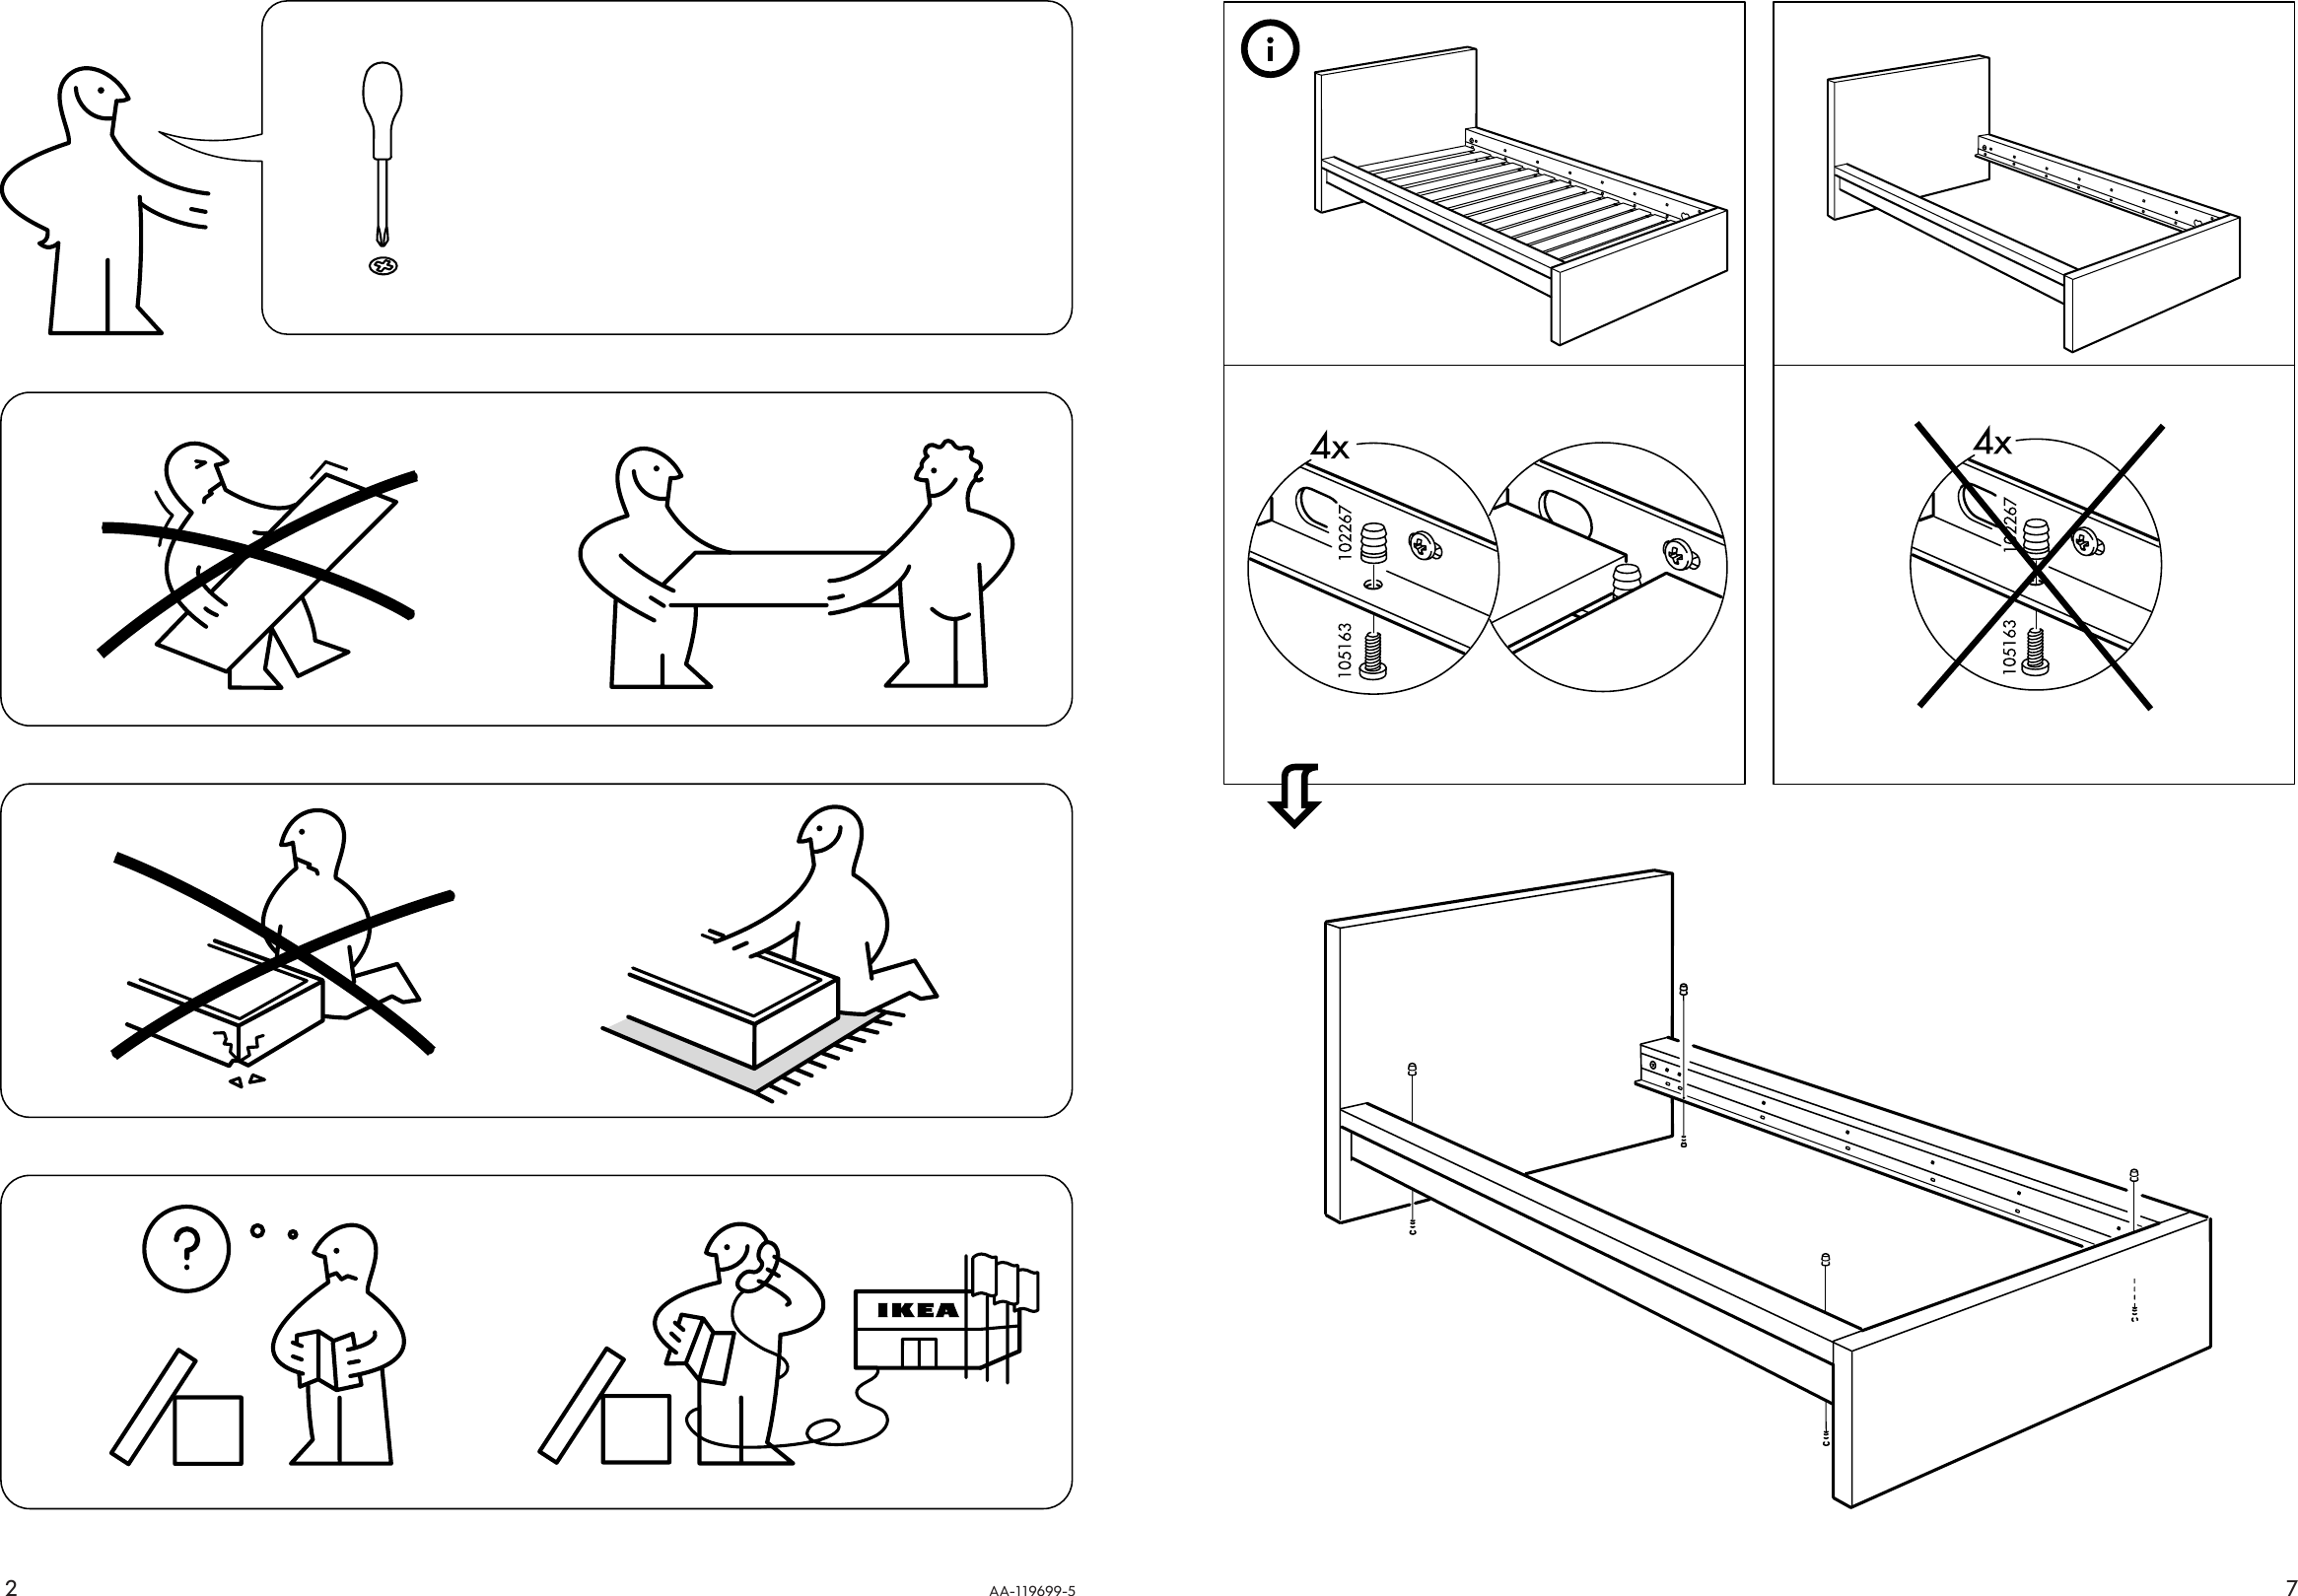 Ikea Malm Bed Frame Twin Assembly Instruction,Writing Wall Art For Bedrooms